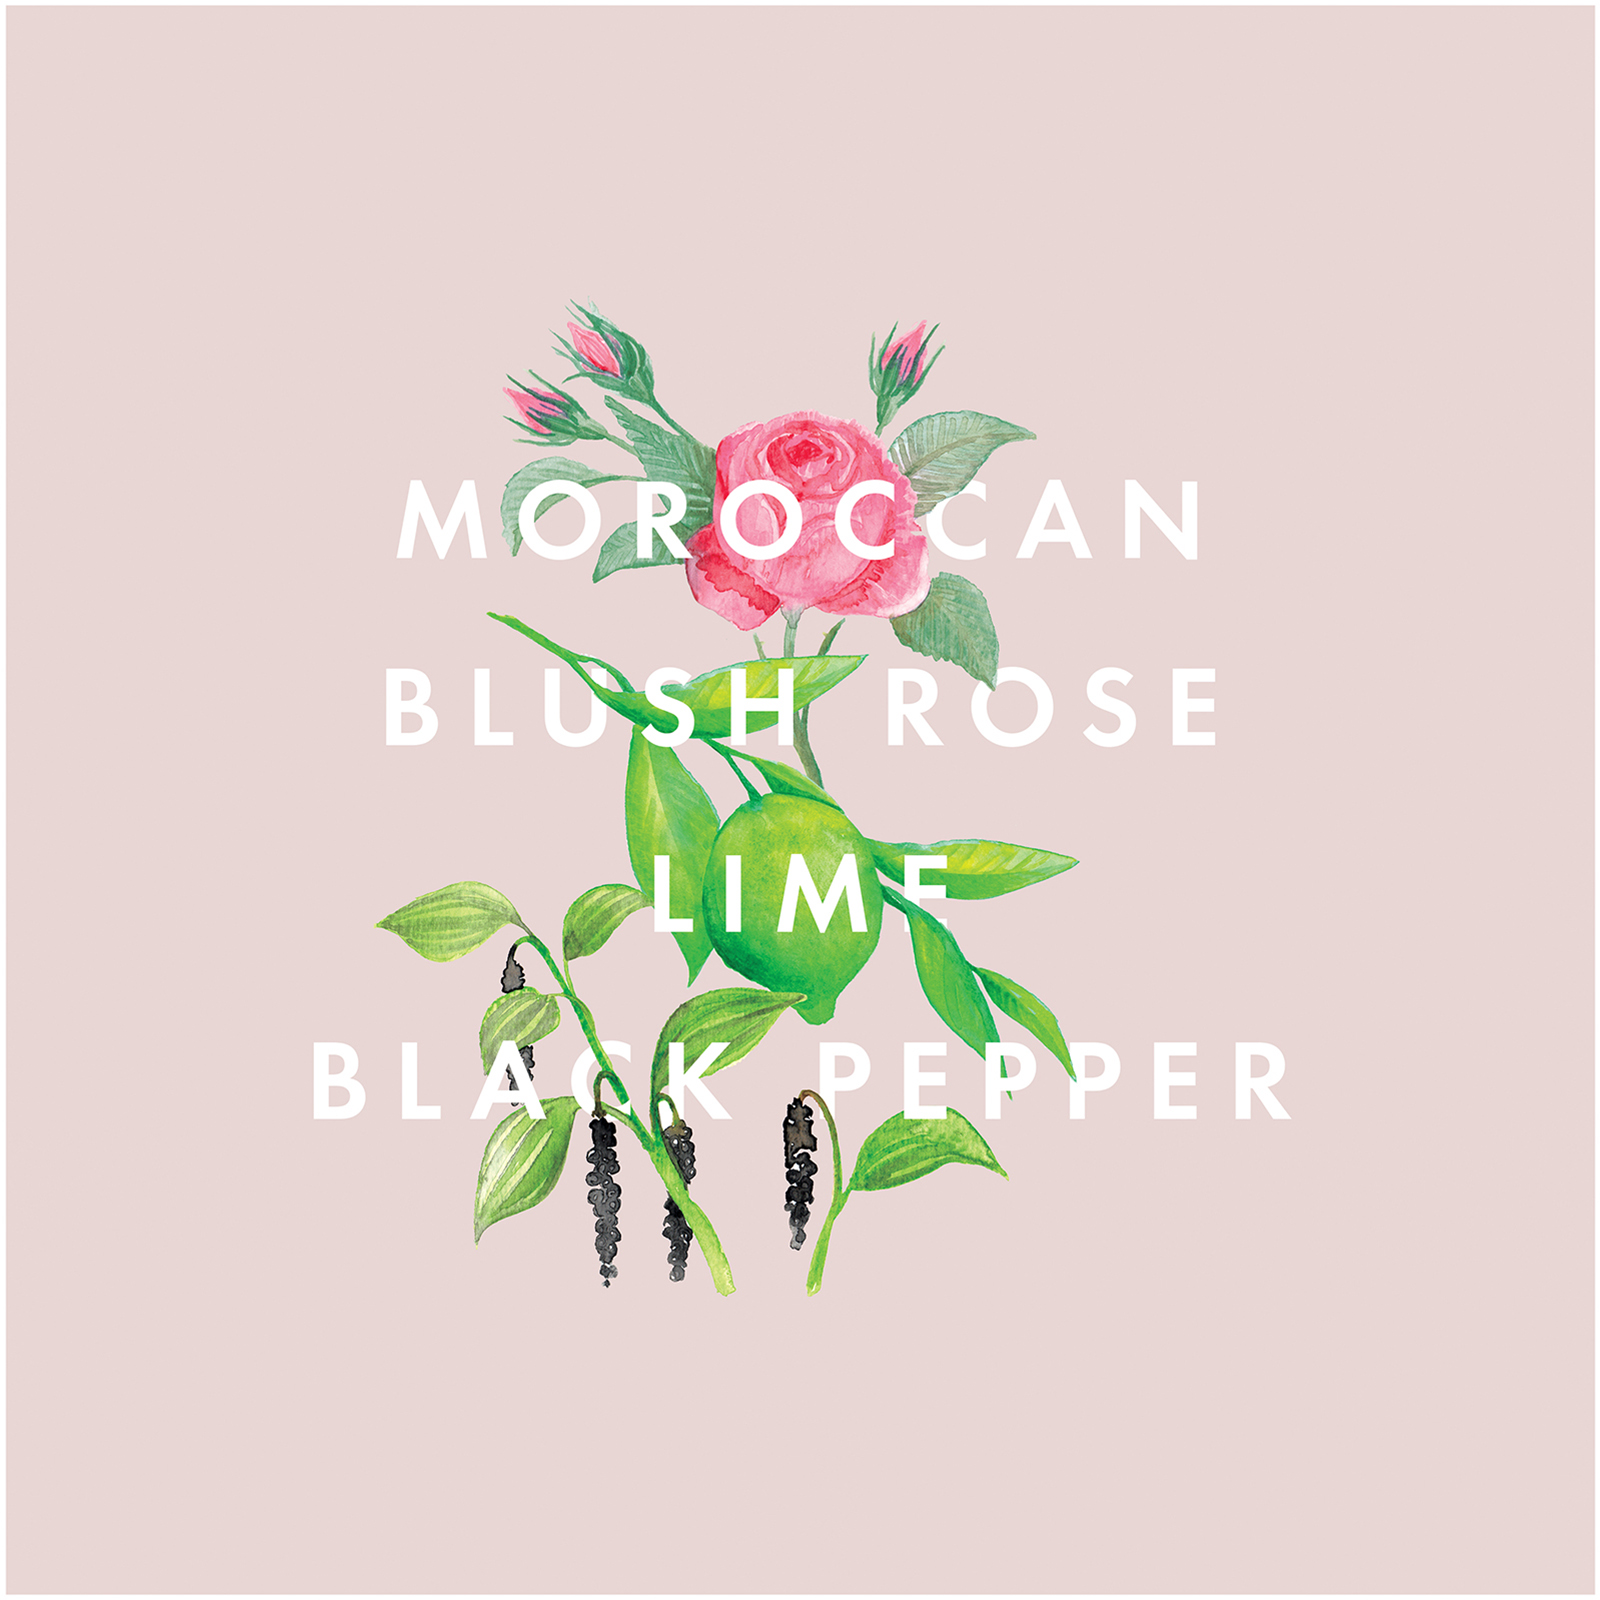 Text, Moroccan Blush Rose, Lime, Black Pepper